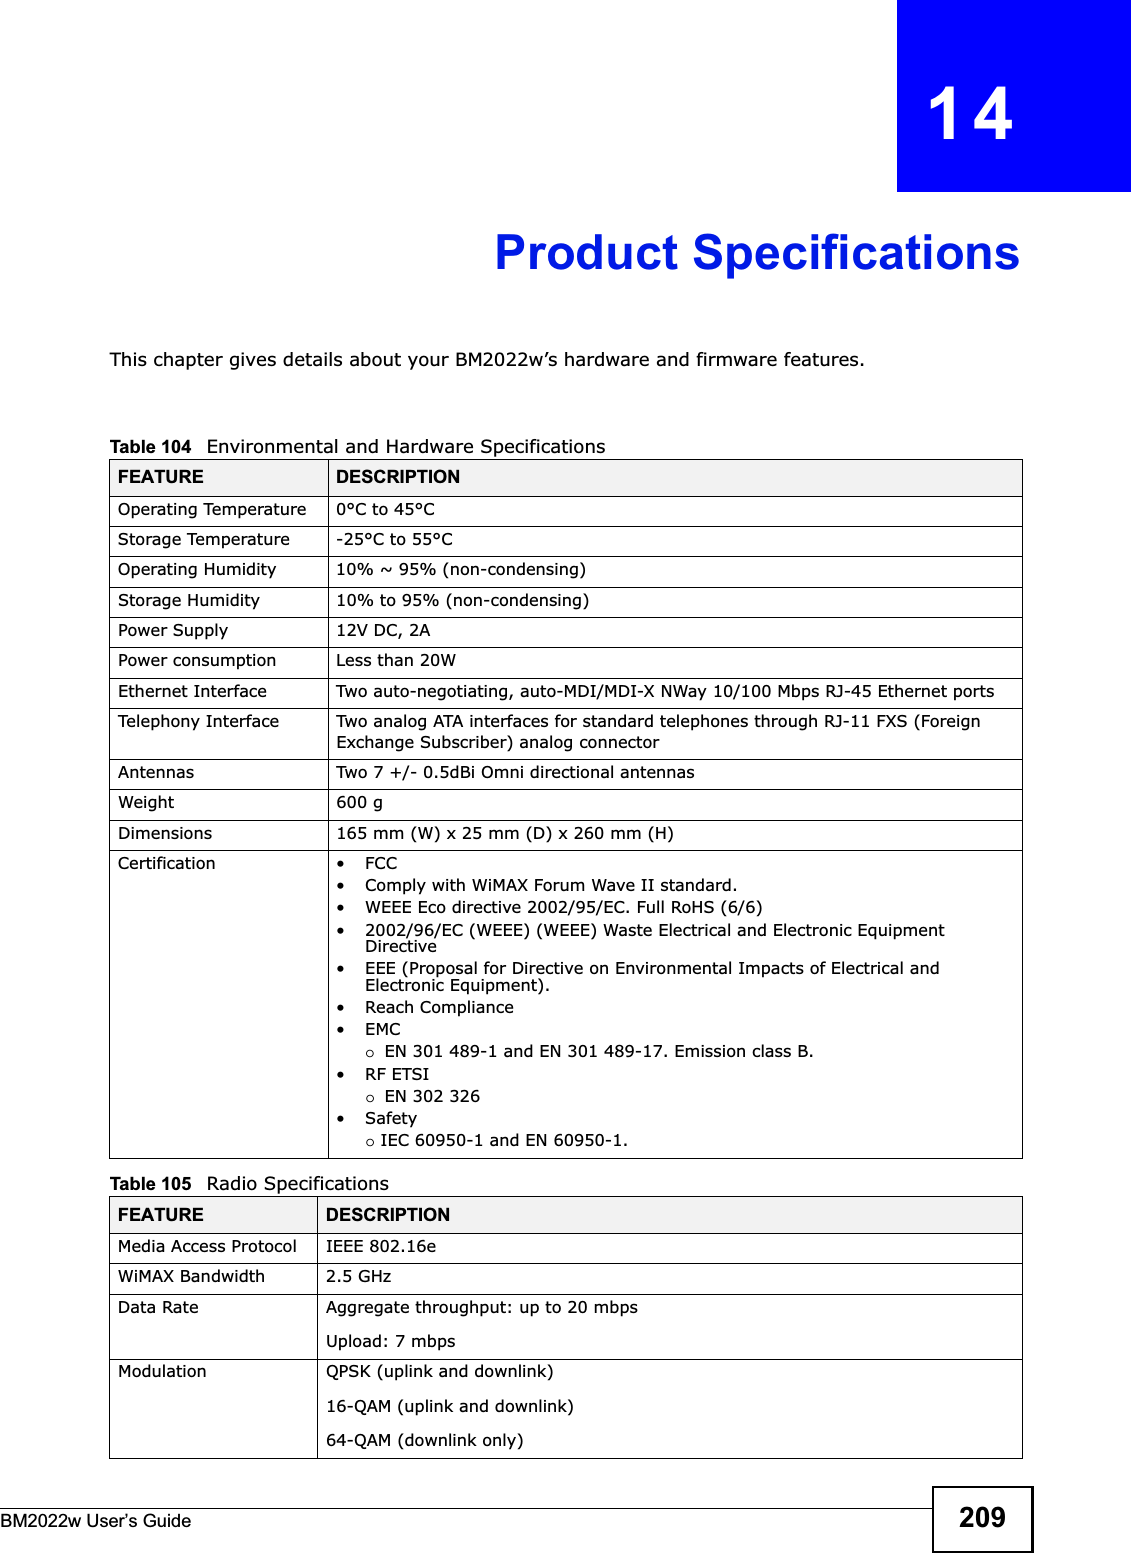 BM2022w User’s Guide 209CHAPTER   14Product SpecificationsThis chapter gives details about your BM2022w’s hardware and firmware features.                     Table 104   Environmental and Hardware SpecificationsFEATURE DESCRIPTIONOperating Temperature 0°C to 45°CStorage Temperature -25°C to 55°COperating Humidity 10% ~ 95% (non-condensing)Storage Humidity  10% to 95% (non-condensing)Power Supply 12V DC, 2APower consumption Less than 20WEthernet Interface Two auto-negotiating, auto-MDI/MDI-X NWay 10/100 Mbps RJ-45 Ethernet portsTelephony Interface Two analog ATA interfaces for standard telephones through RJ-11 FXS (Foreign Exchange Subscriber) analog connectorAntennas Two 7 +/- 0.5dBi Omni directional antennasg 006thgieWDimensions 165 mm (W) x 25 mm (D) x 260 mm (H)Certification • FCC• Comply with WiMAX Forum Wave II standard.• WEEE Eco directive 2002/95/EC. Full RoHS (6/6)• 2002/96/EC (WEEE) (WEEE) Waste Electrical and Electronic Equipment Directive• EEE (Proposal for Directive on Environmental Impacts of Electrical and Electronic Equipment).• Reach Compliance•EMCoEN 301 489-1 and EN 301 489-17. Emission class B.•RF ETSIoEN 302 326•Safetyo IEC 60950-1 and EN 60950-1.Table 105   Radio SpecificationsFEATURE DESCRIPTIONMedia Access Protocol IEEE 802.16eWiMAX Bandwidth 2.5 GHzData Rate Aggregate throughput: up to 20 mbpsUpload: 7 mbpsModulation QPSK (uplink and downlink)16-QAM (uplink and downlink)64-QAM (downlink only)